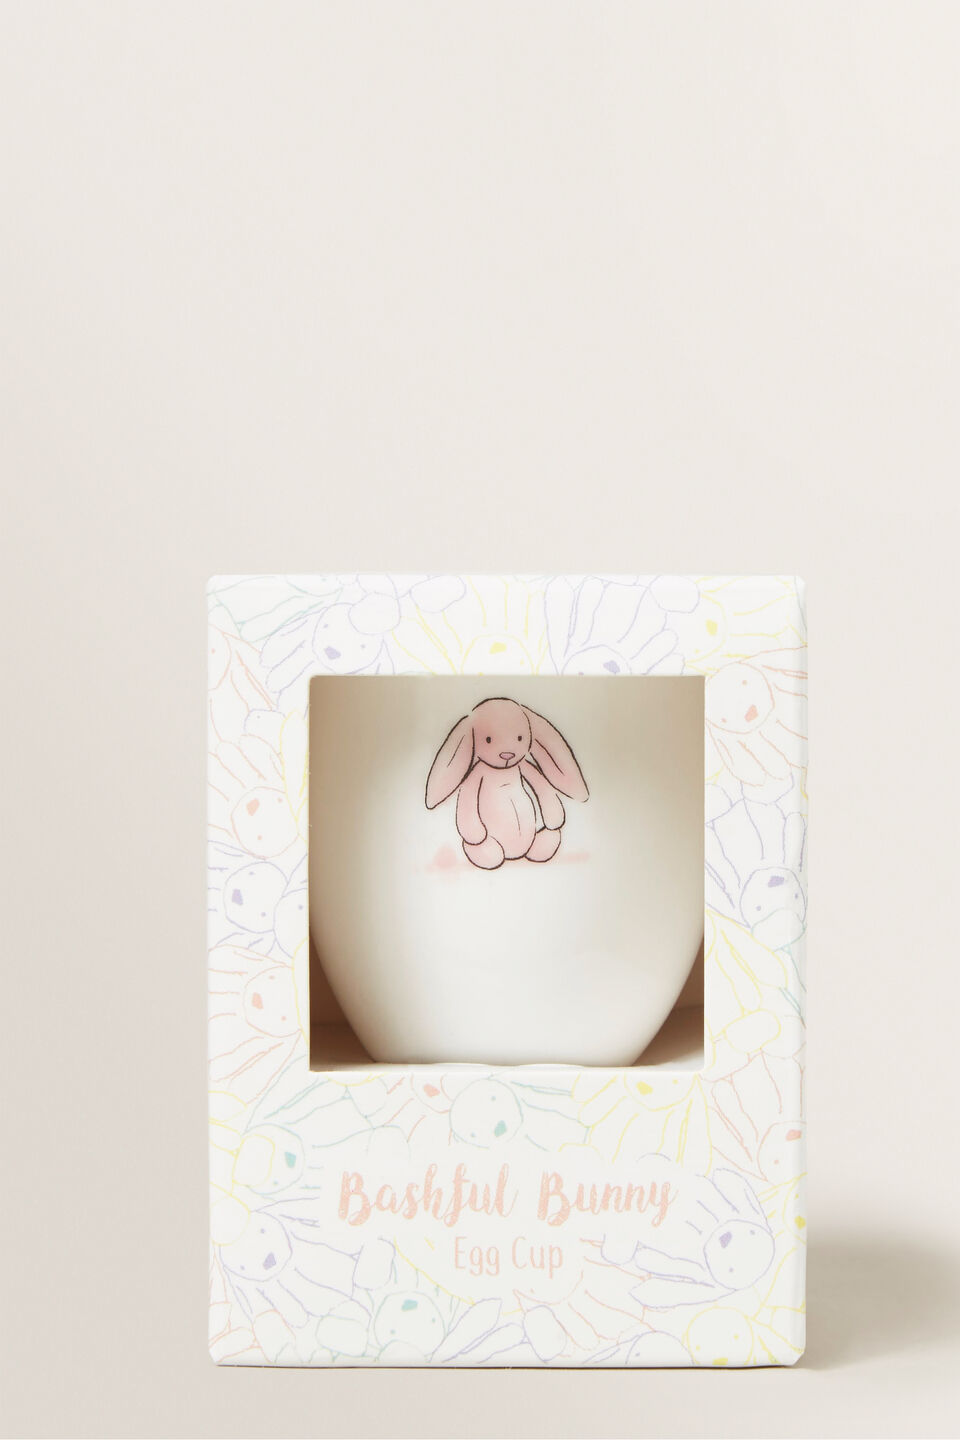 Jellycat Egg Cup  